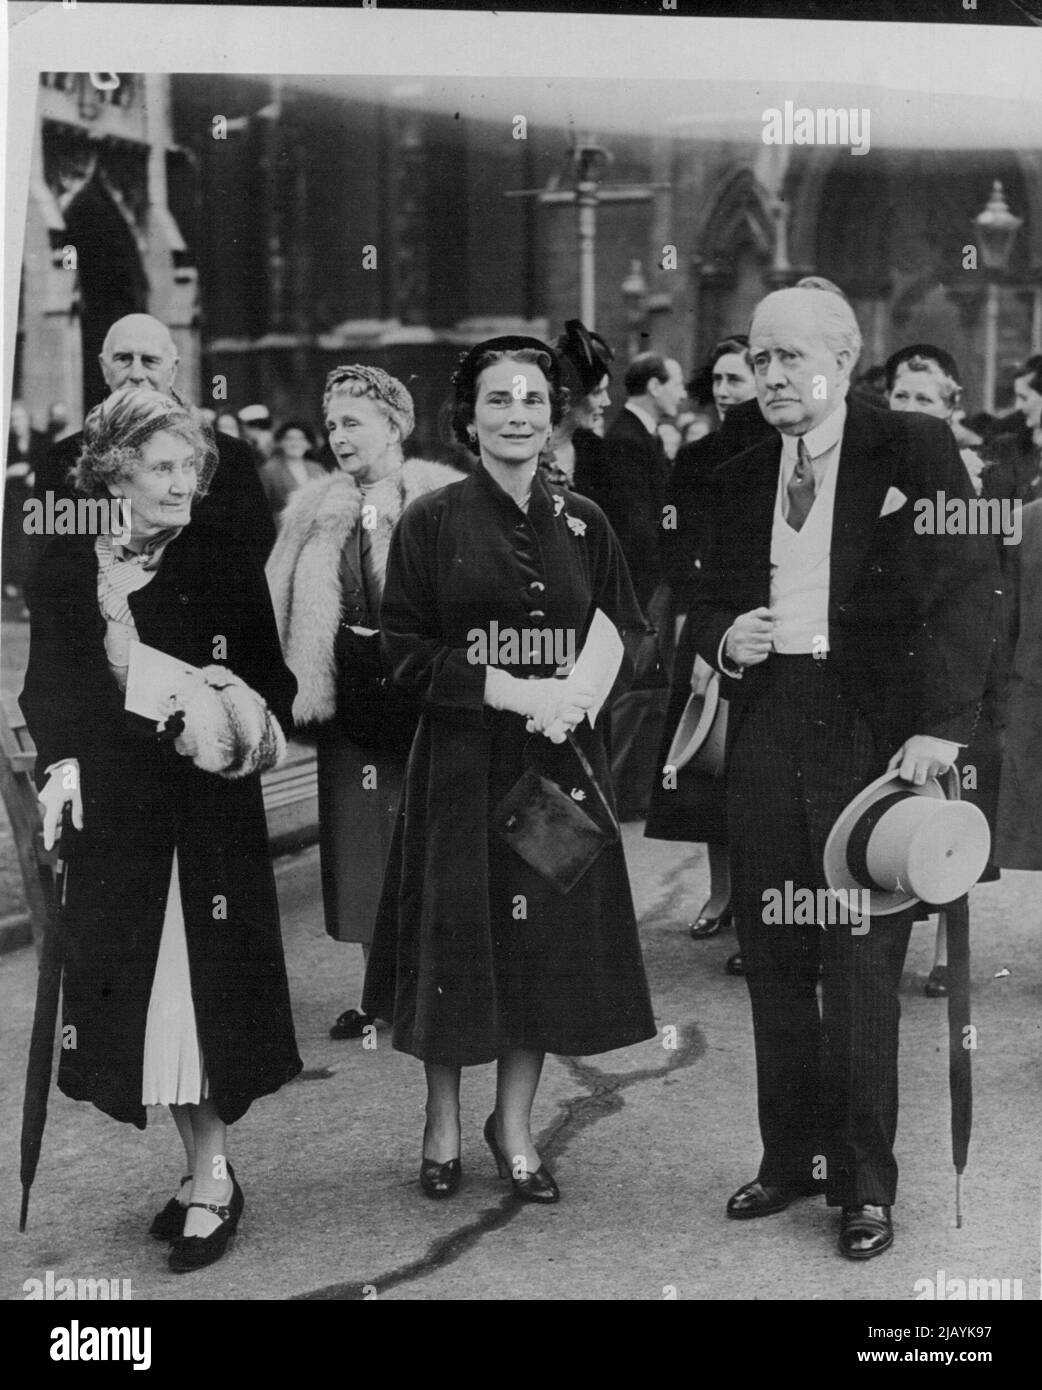 Duchess of Gloucester Attending Society Wedding -- The Duchess of Gloucester (right) is seen on her arrival at St. Margaret's Westminster, for the wedding of Miss Renira Hawkins, Younger daughter of Admiral Sir Geoffrey Hawkins and Lady Margaret Hawkins, and 28 year old journalist Klistaire Horne, son of the late Sir Alan and Lady Horne. November 23, 1953. (Photo by London Express News And Features Services) Stock Photo